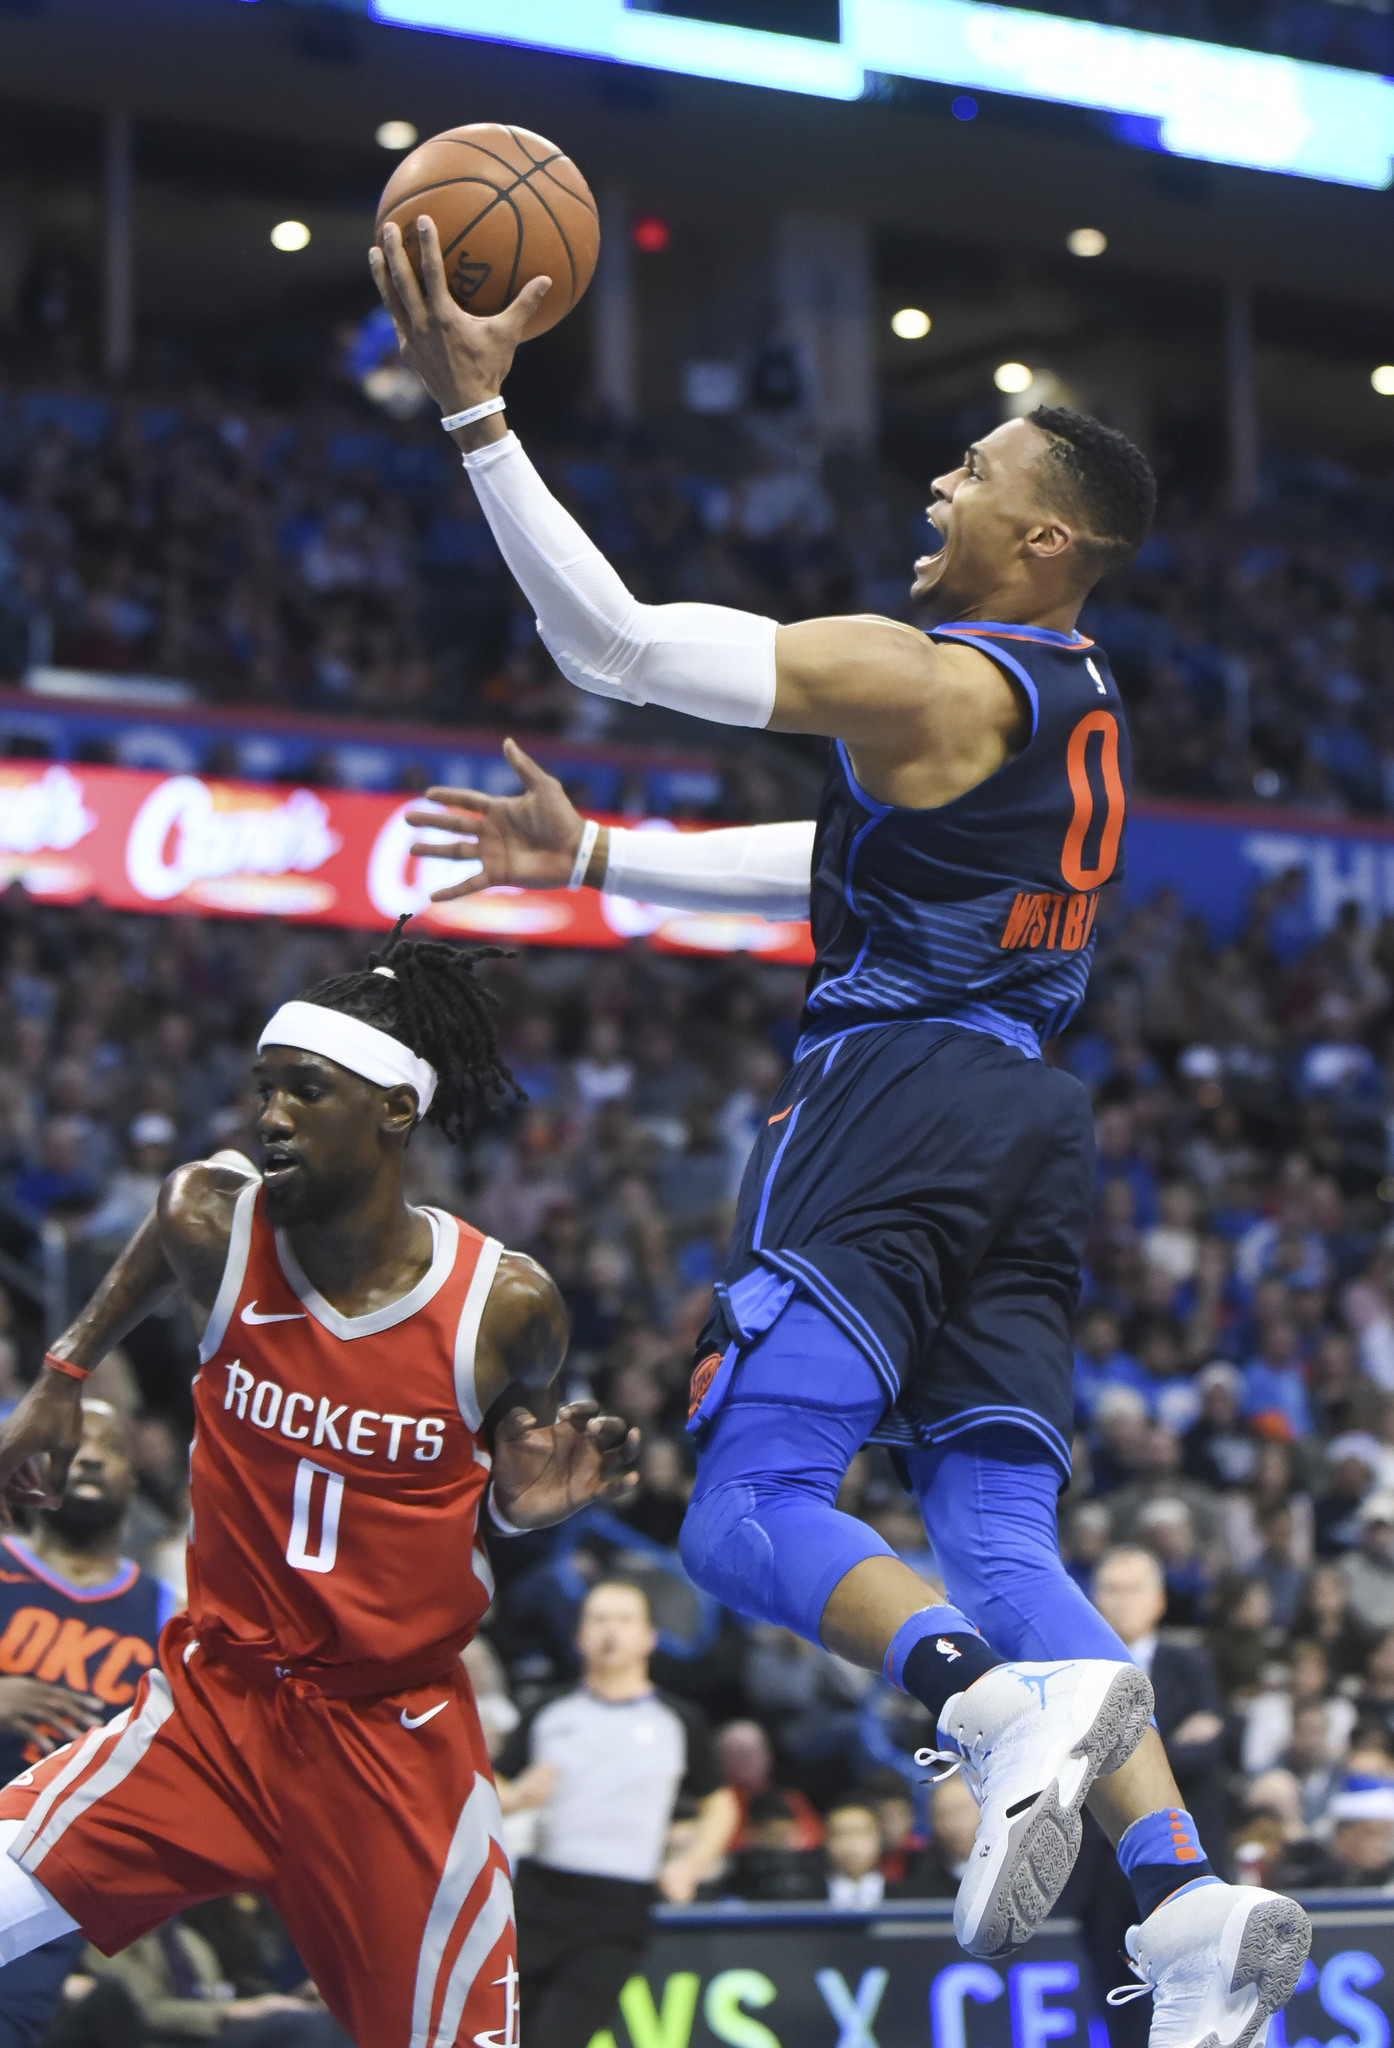 Russell Westbrook scores 31, OKC keeps rolling with win over Rockets - Chicago Tribune1394 x 2048